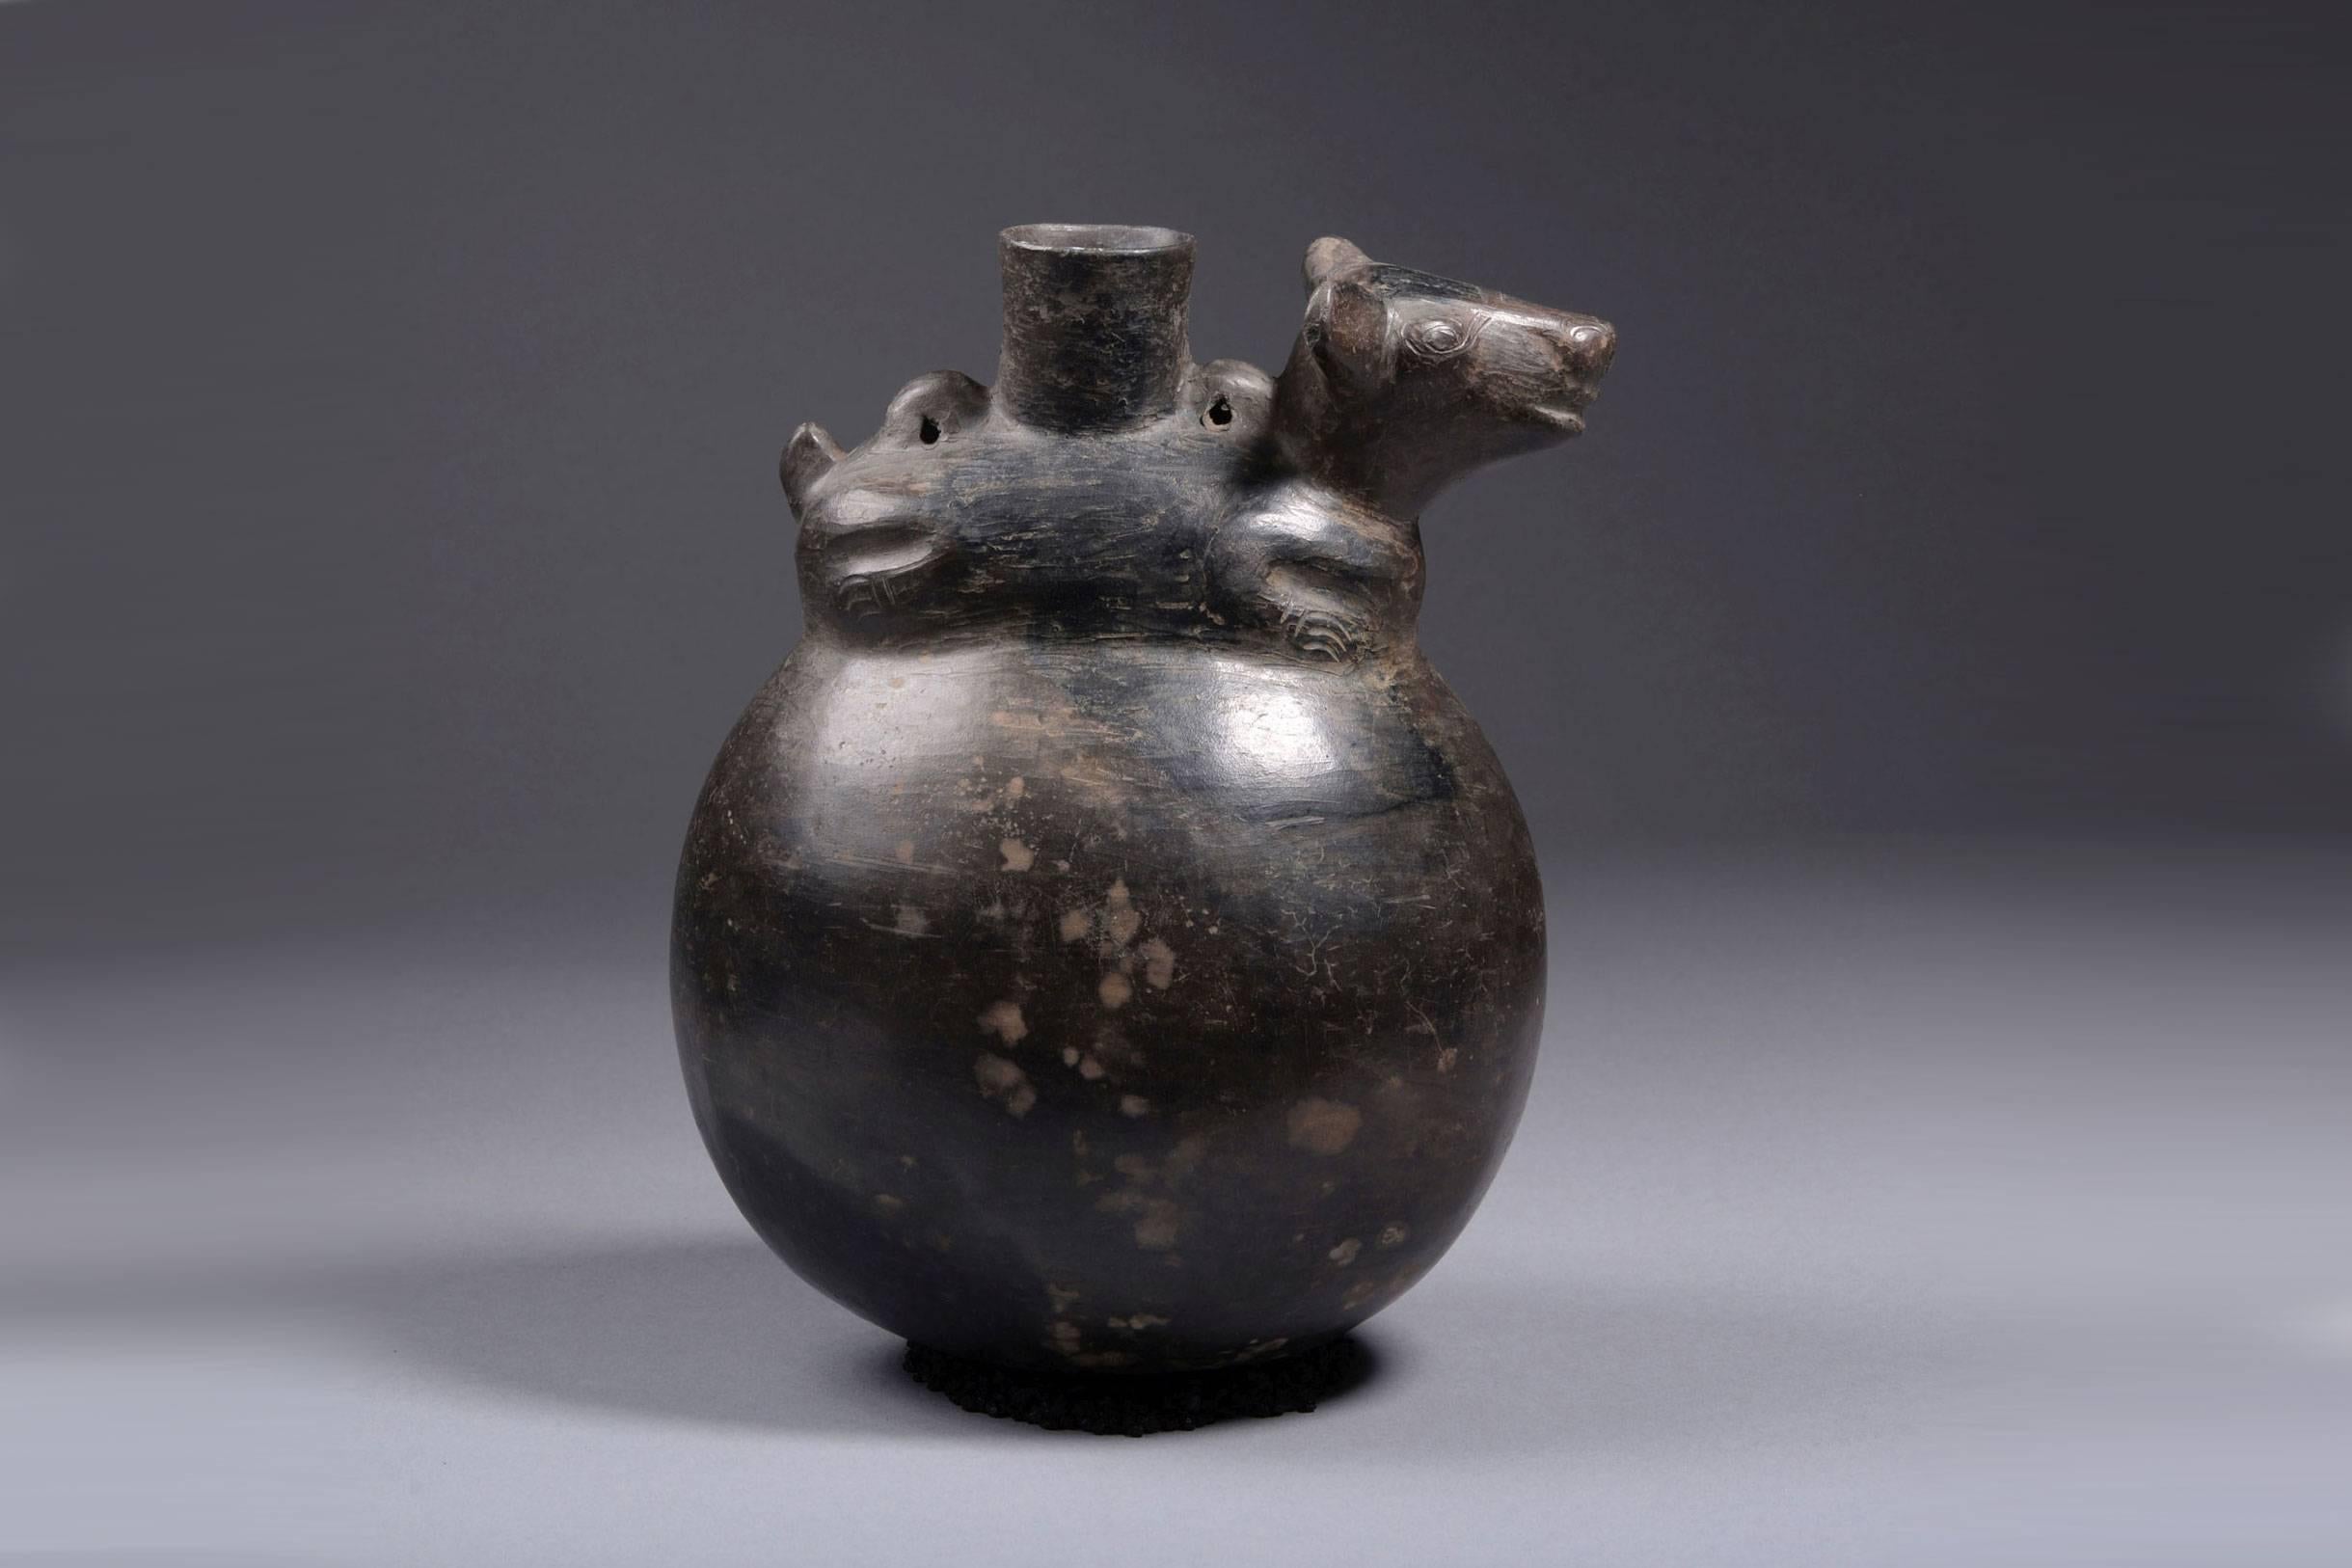 A wonderful ancient Peruvian Chimu culture effigy bottle, dating to approximately 1100-1400 AD.

An attractive burnished bottle, of globular form, with rounded base. A moulded figure of a young llama sits in rest atop the bottle with a cylindrical